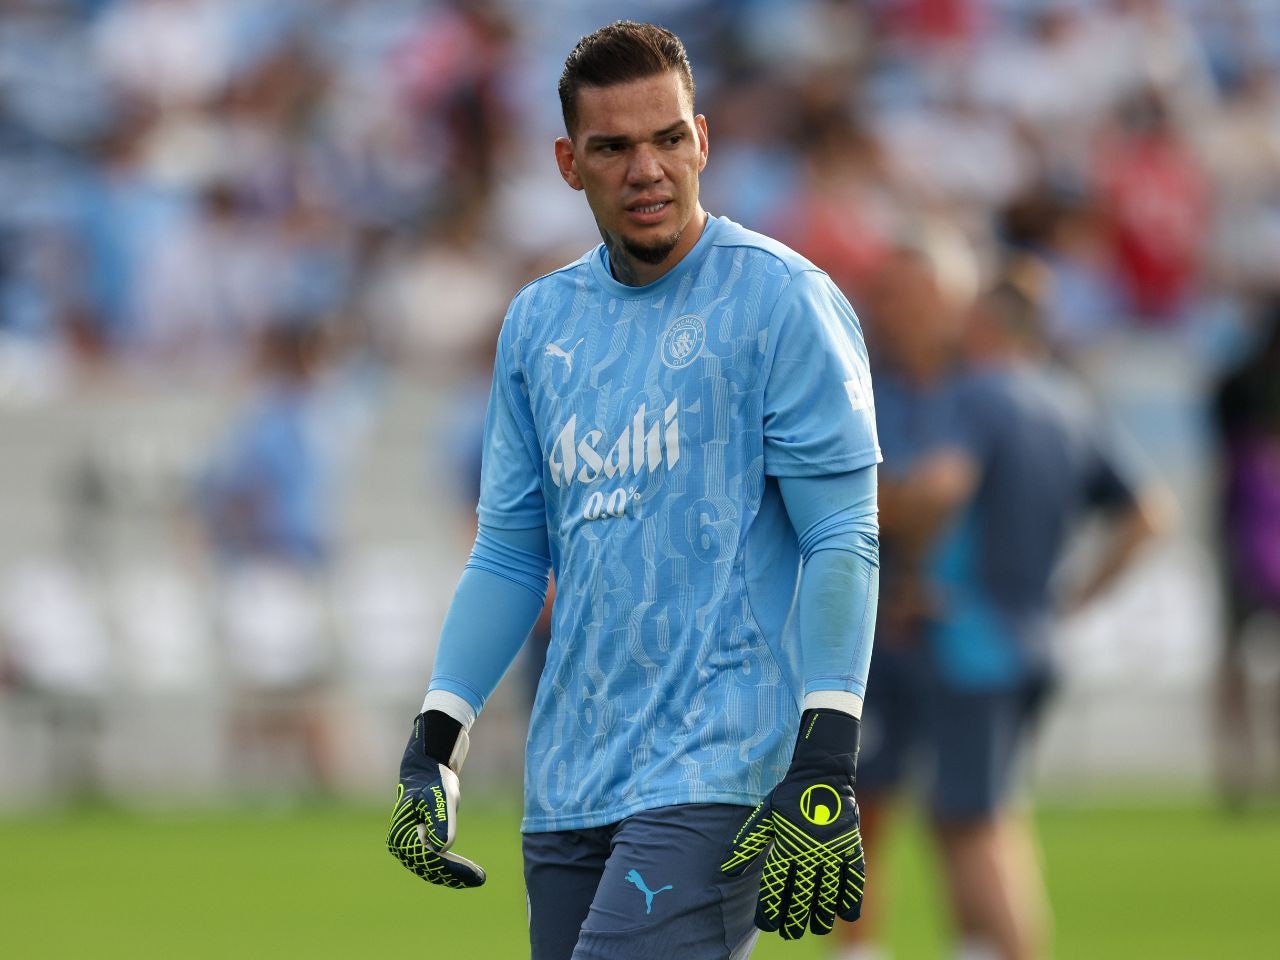 Ederson warming up for Manchester City.